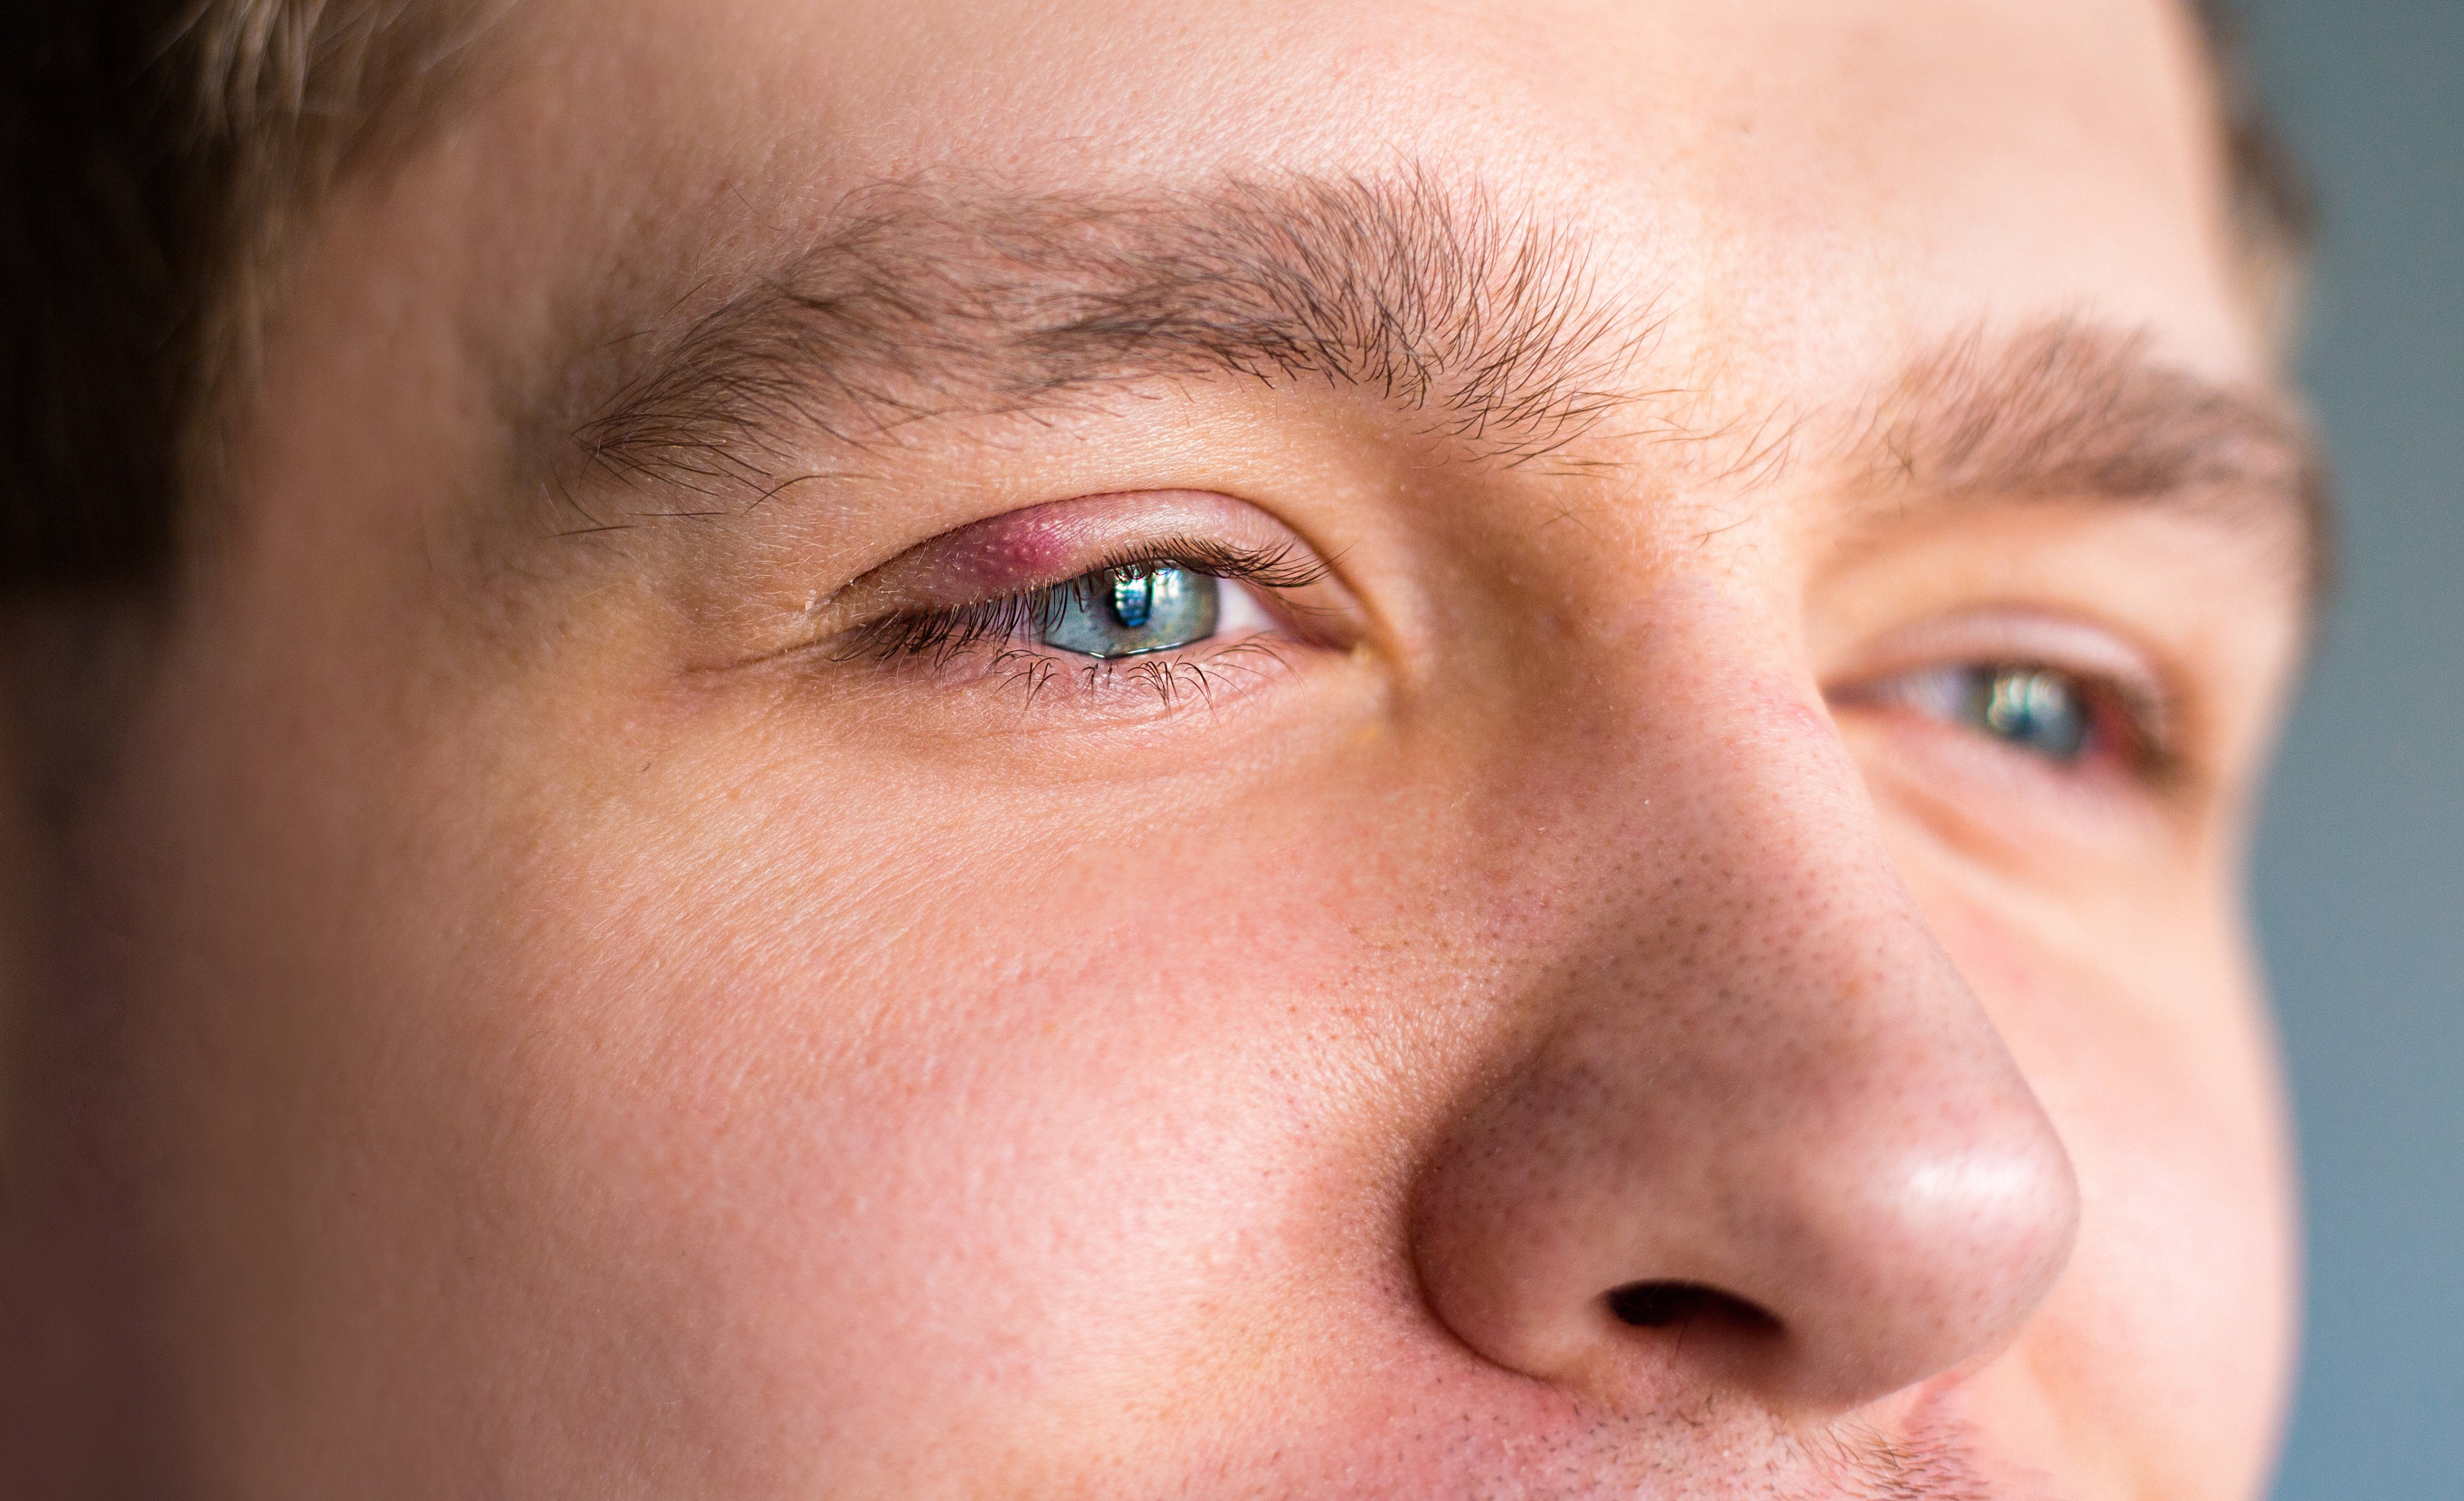 What Is a Stye, and How Is It Treated?